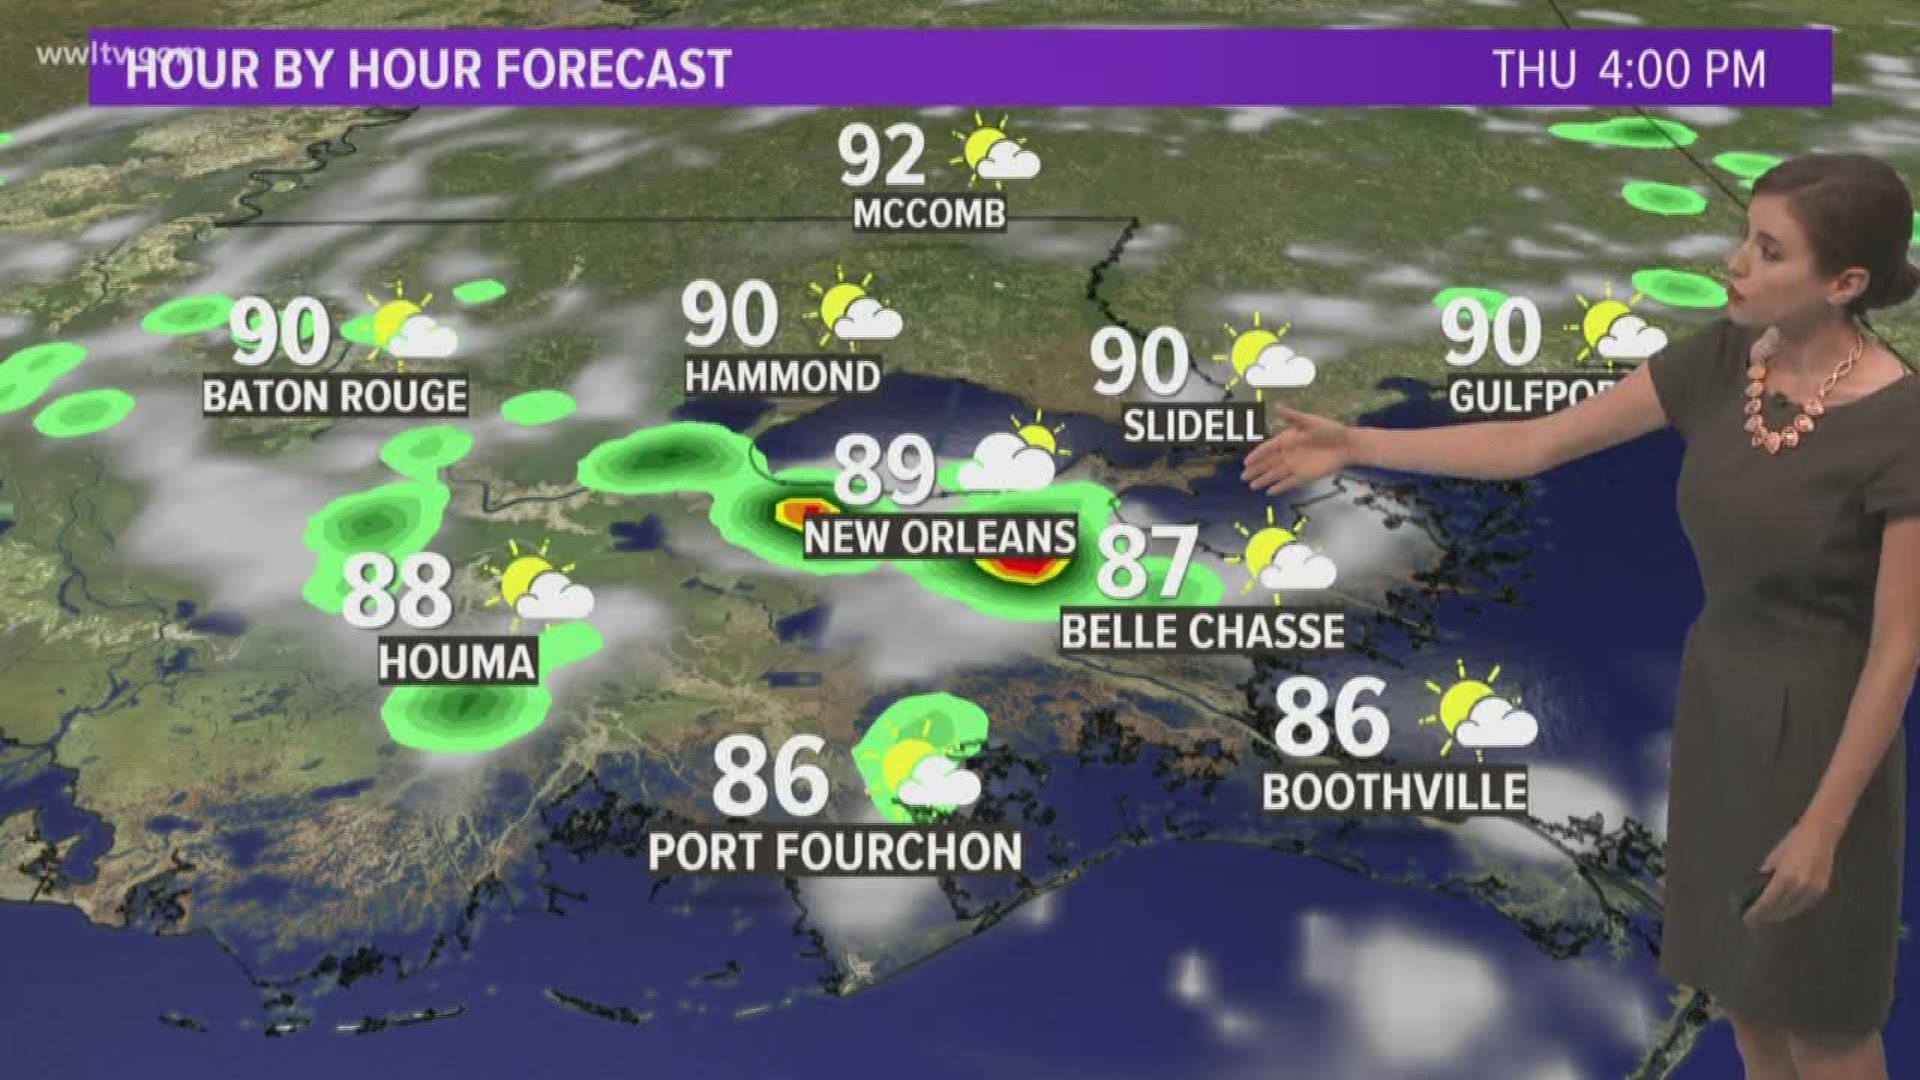 Meteorologist Alexandra Cranford has the forecast at 5 p.m. on Wednesday, July 17, 2019.